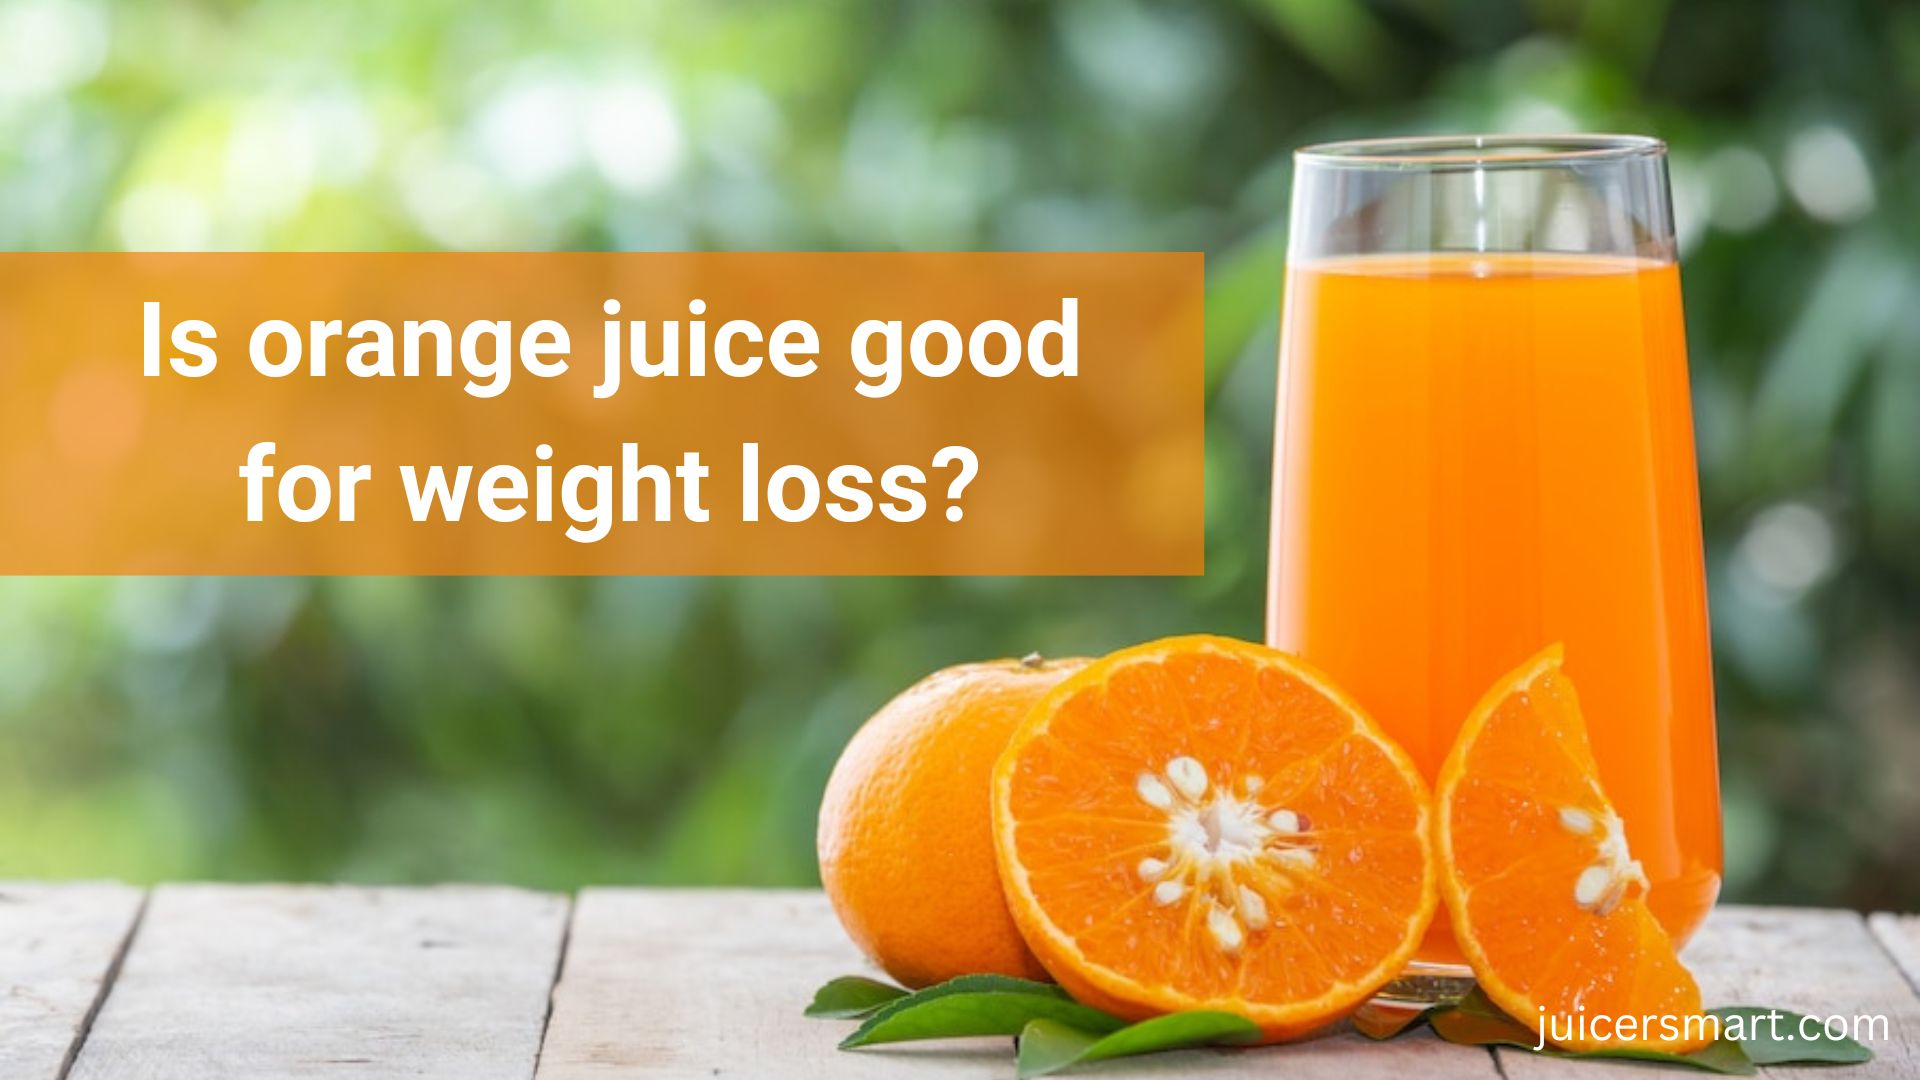 Is orange juice good for weight loss?